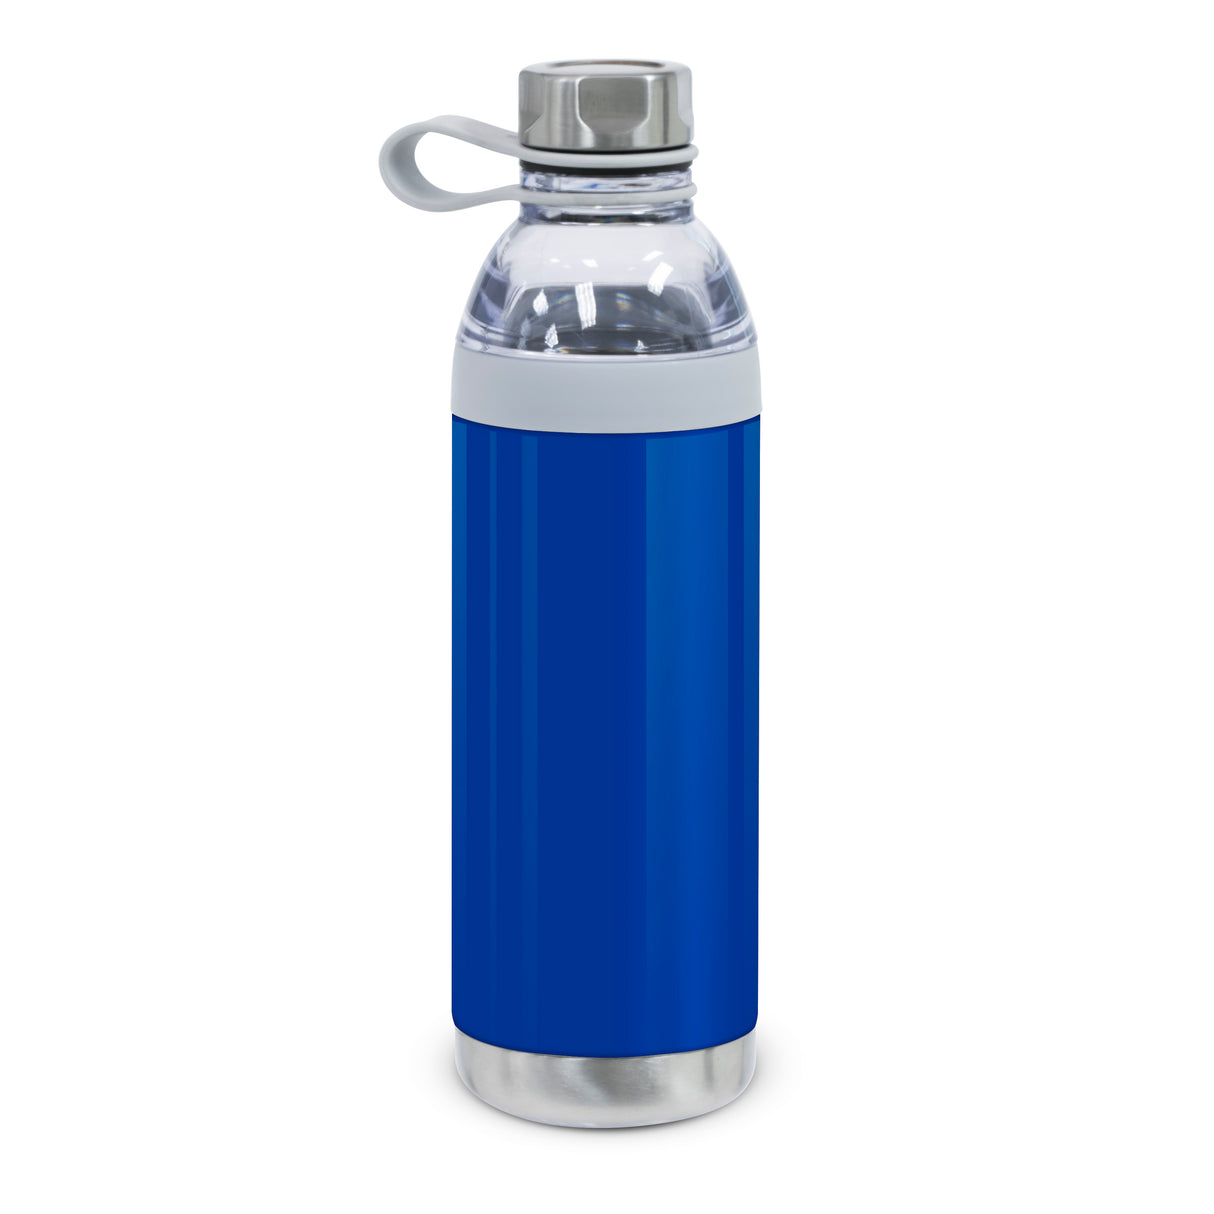 20 Oz. Dual Opening Stainless Steel Water Bottle